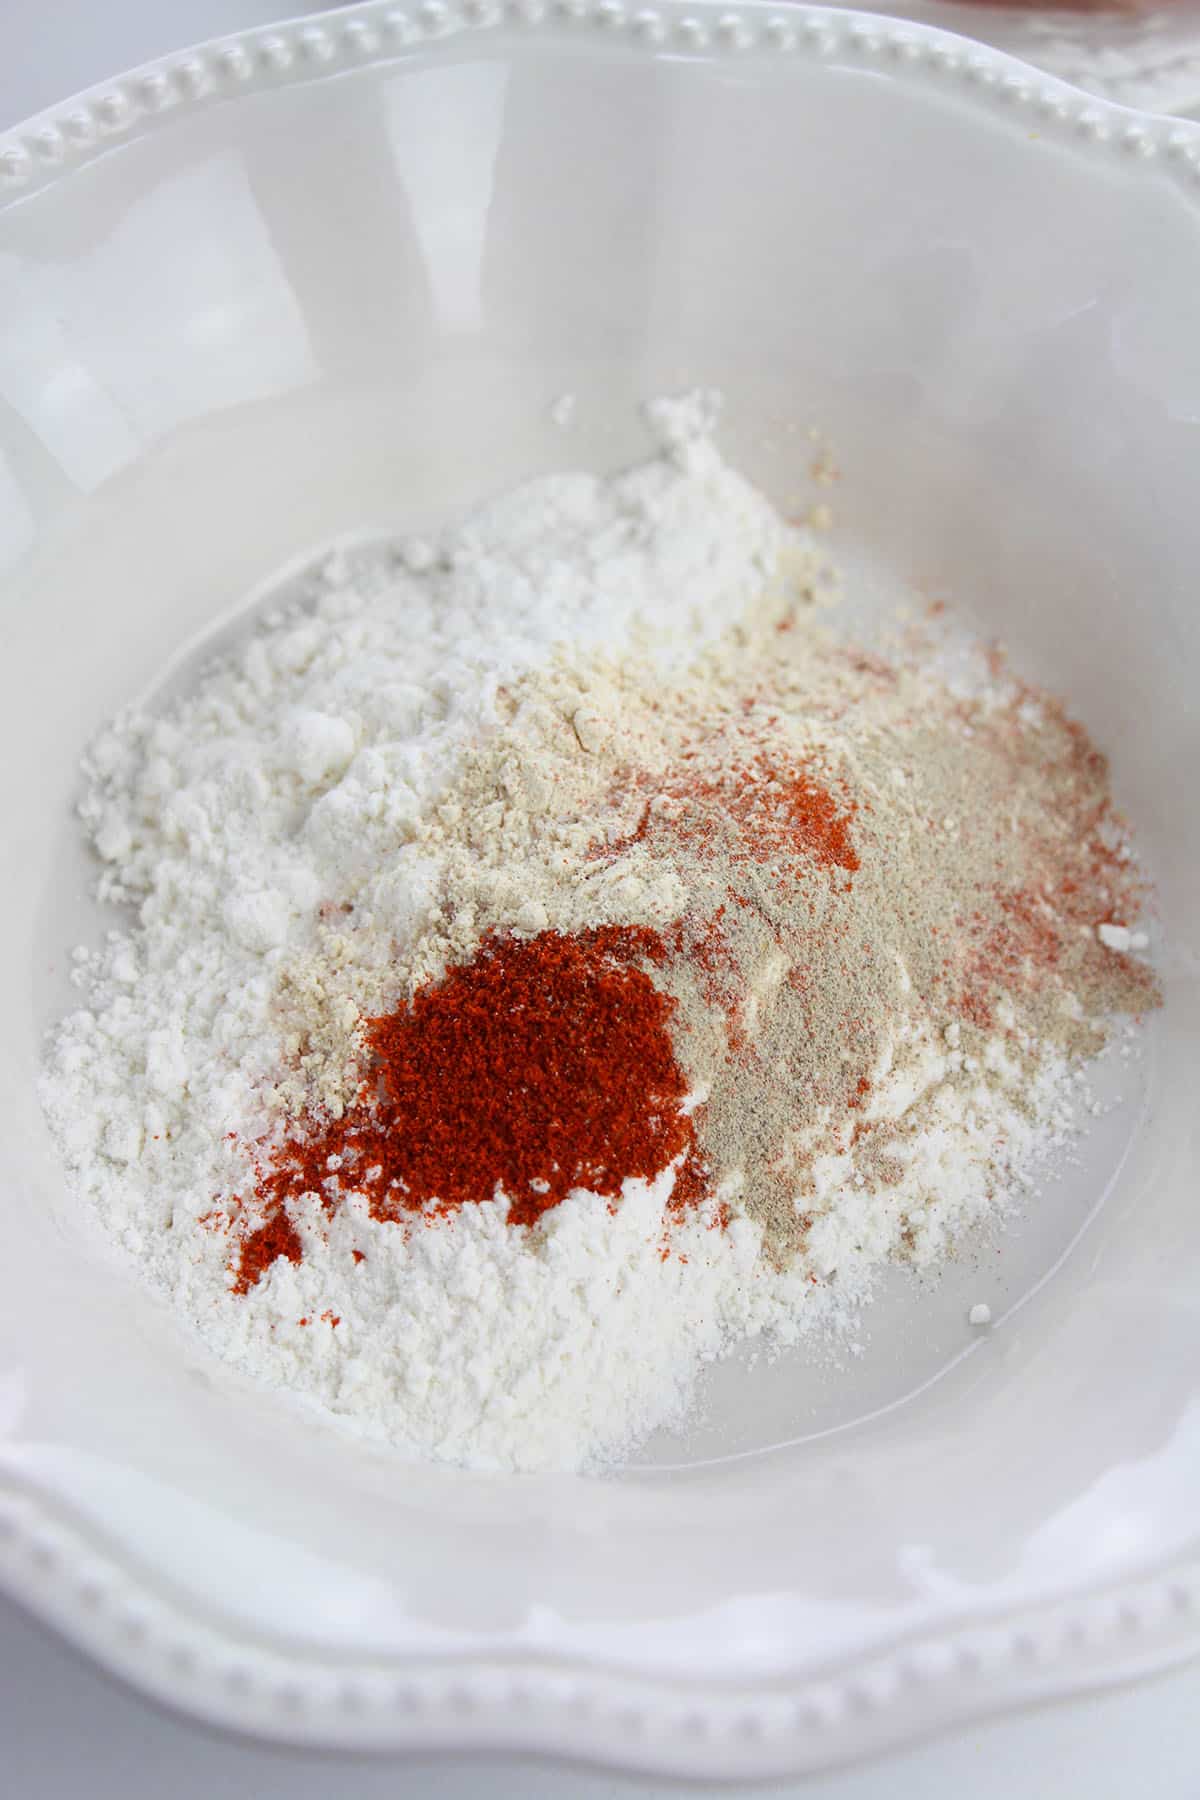 All-purpose flour and seasoning in a shallow dish